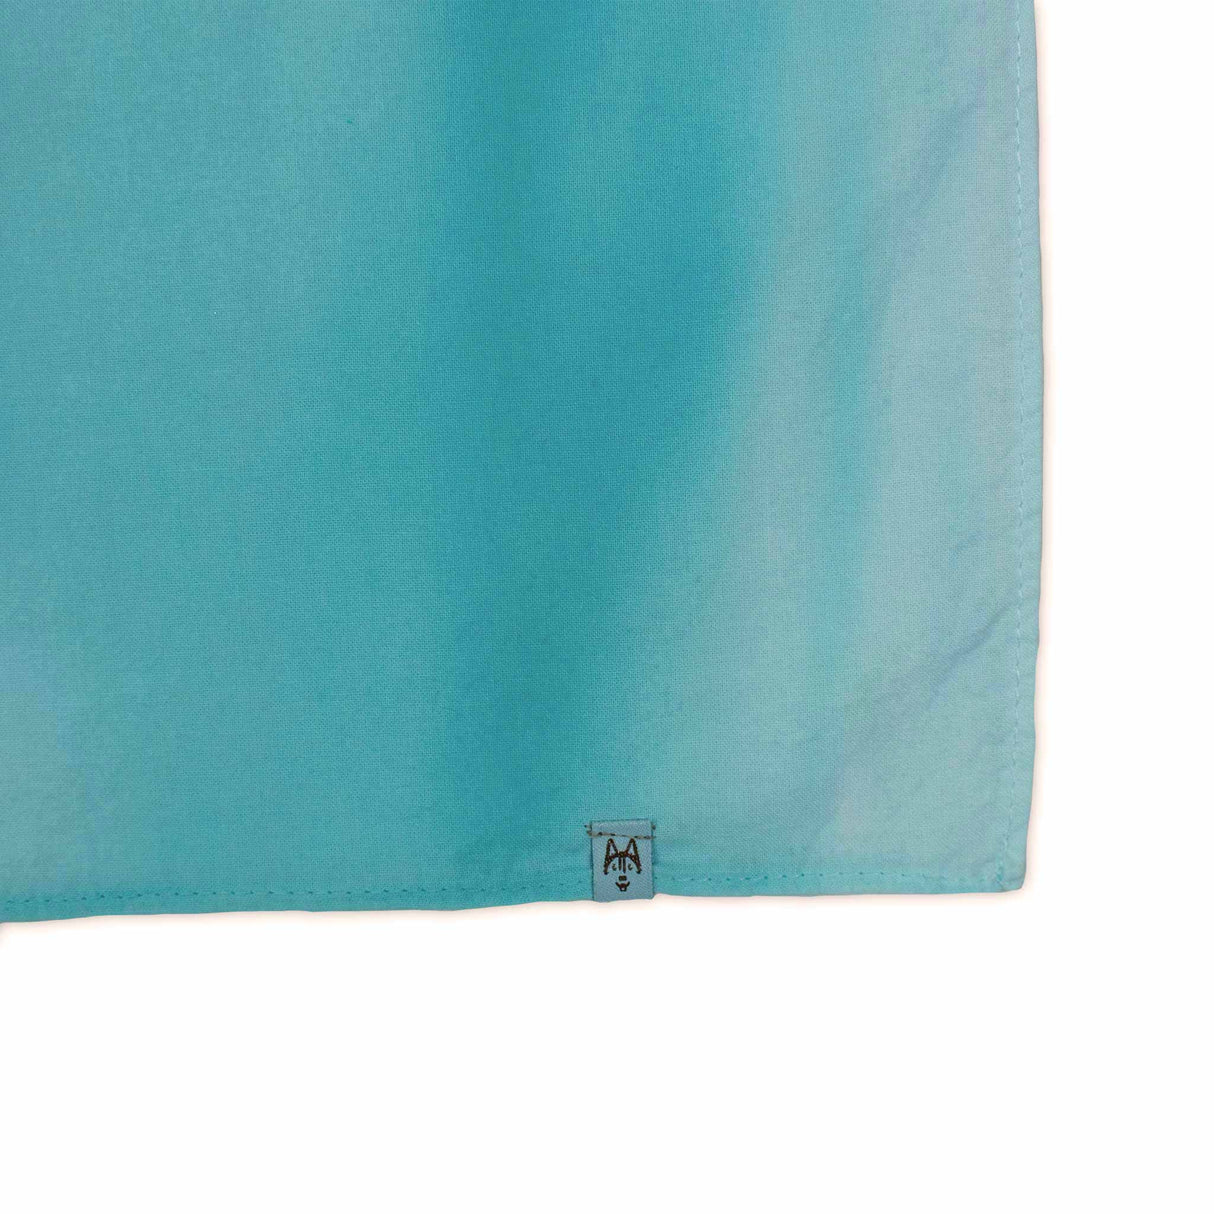 This bandana displays a dreamy ice-dye pattern with aqueous tones of green and blue, reminiscent of a gentle underwater current.